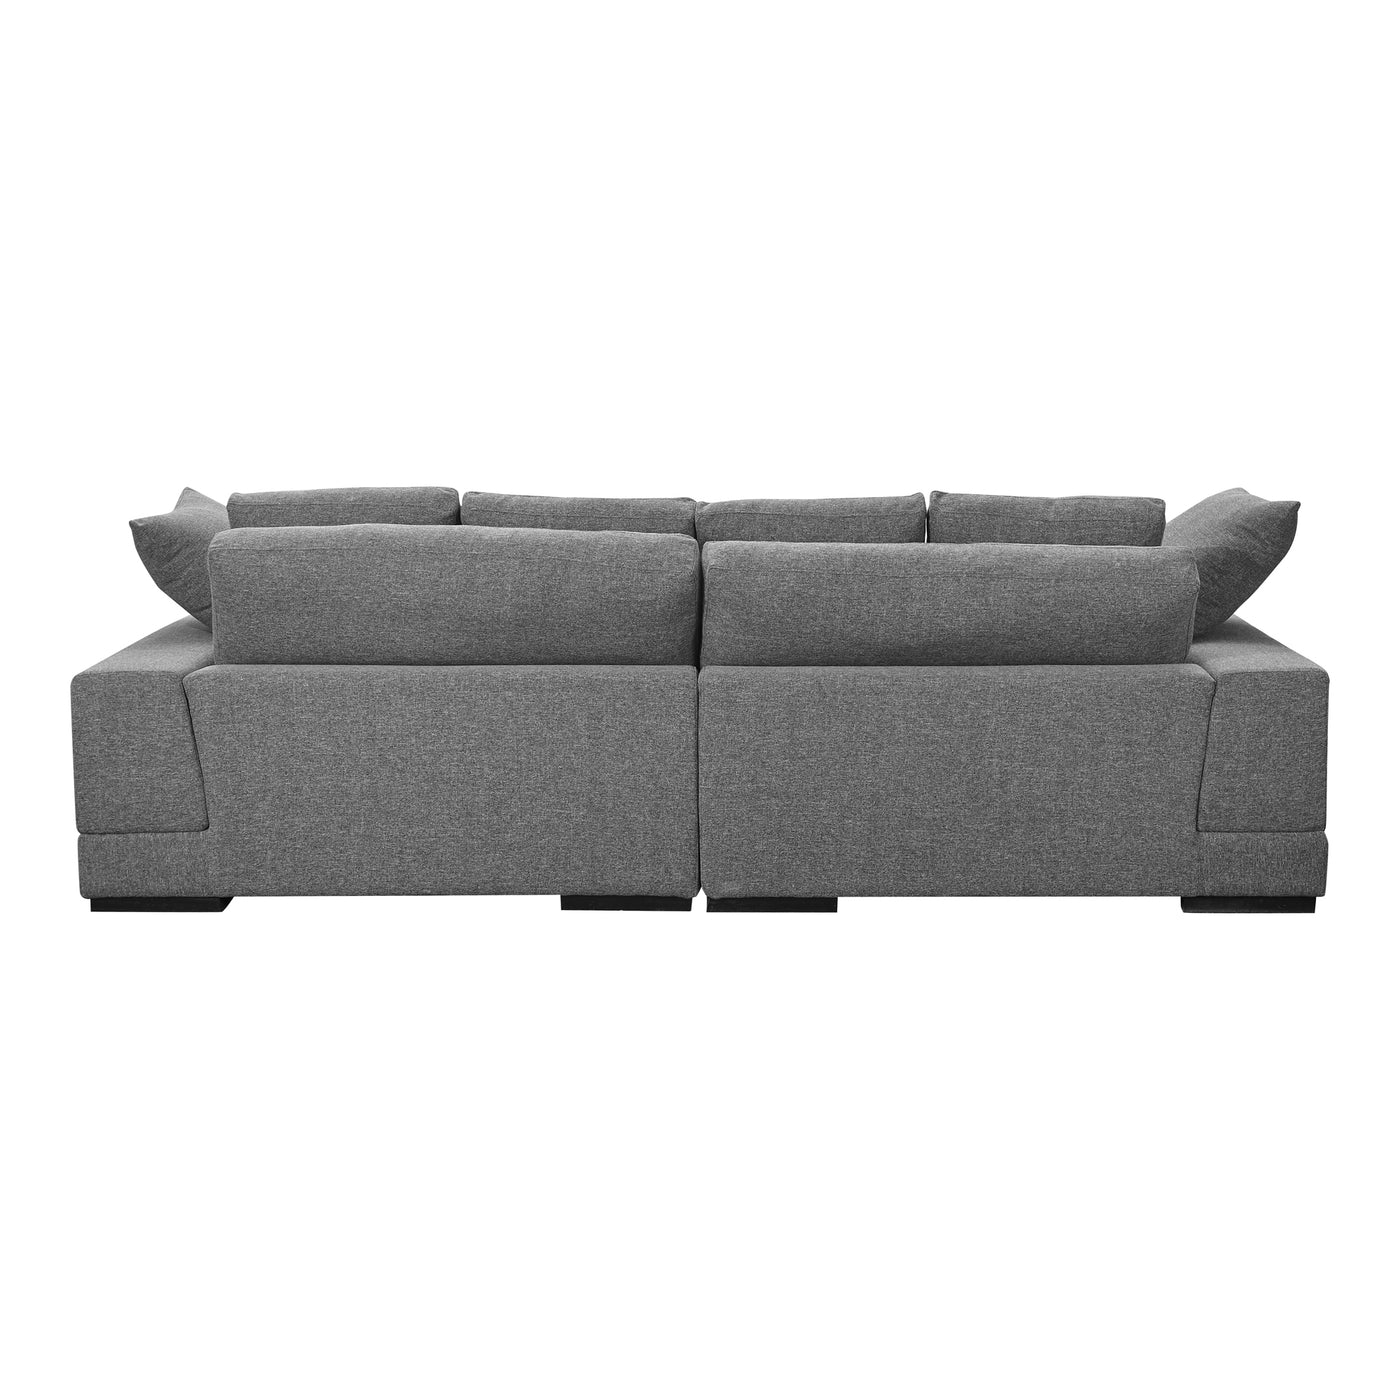 Sink into the luxurious cushions of the Plunge sectional sofa to experience ultimate comfort and relaxation. Clean lines a...